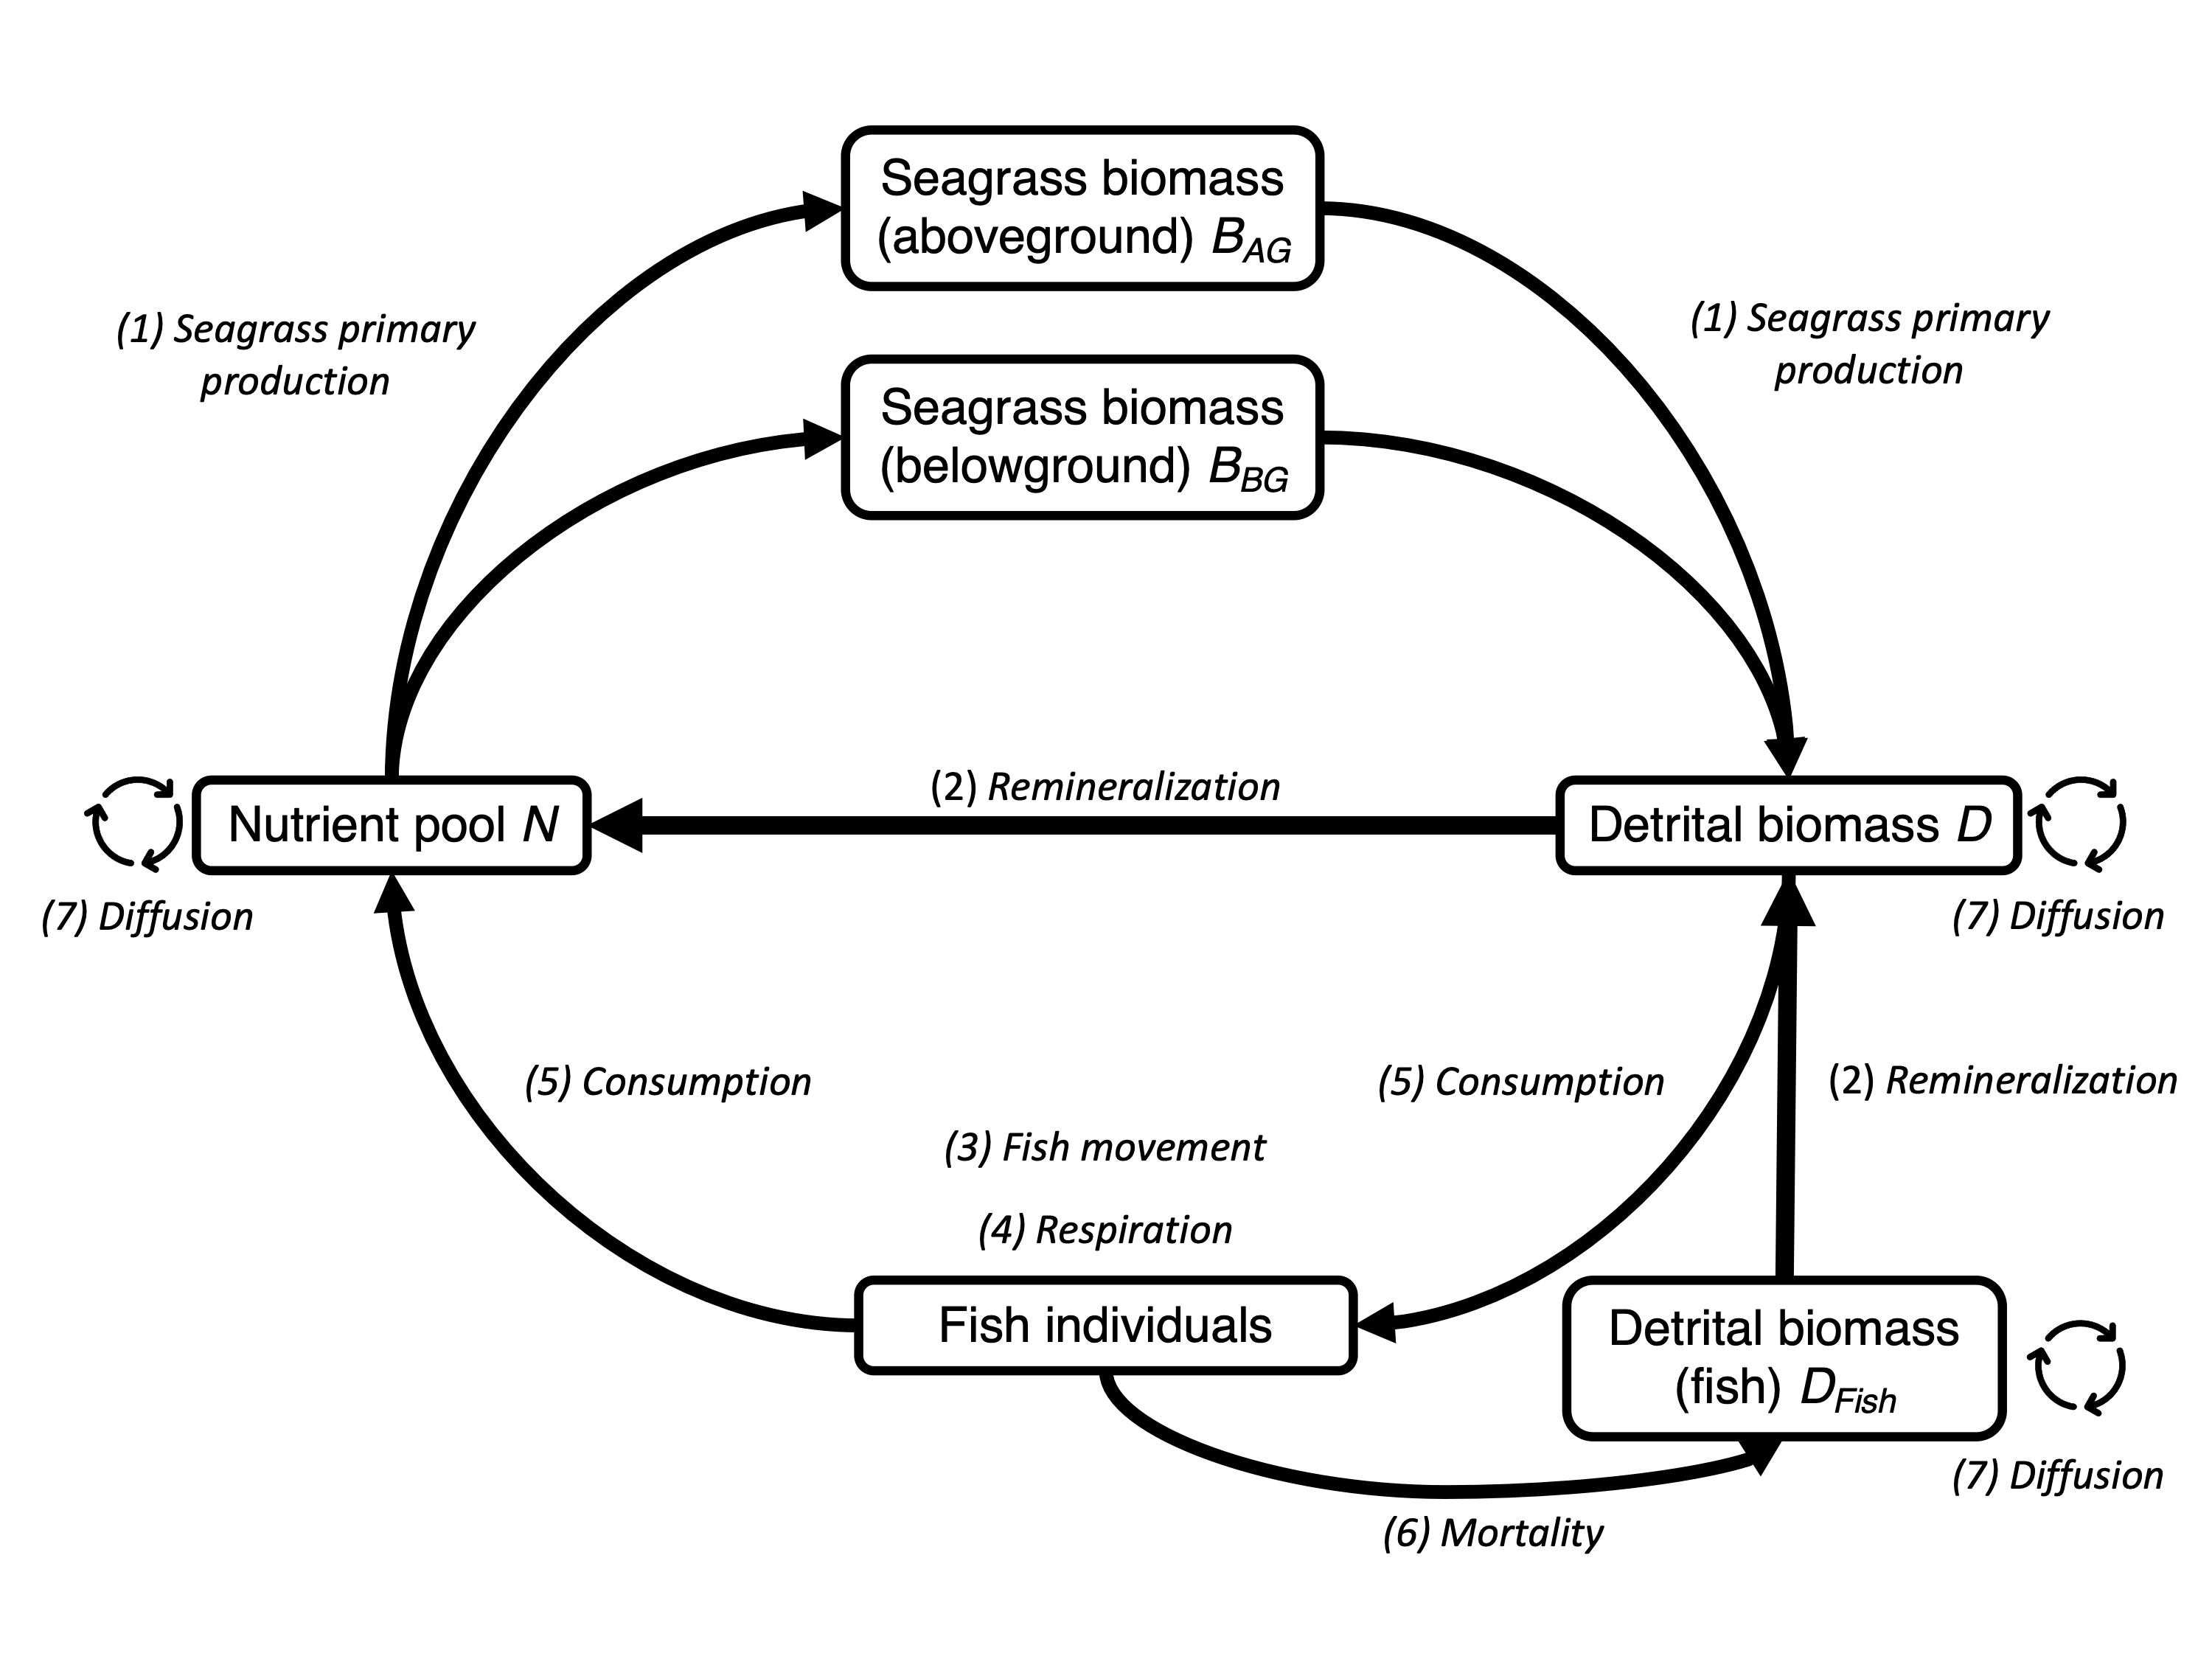 Schematic overview of model concept (Adapted from DeAngelis, D.L., 1992. Dynamics of Nutrient Cycling and Food Webs. Springer Netherlands, Dordrecht. https://doi.org/10.1007/978-94-011-2342-6.